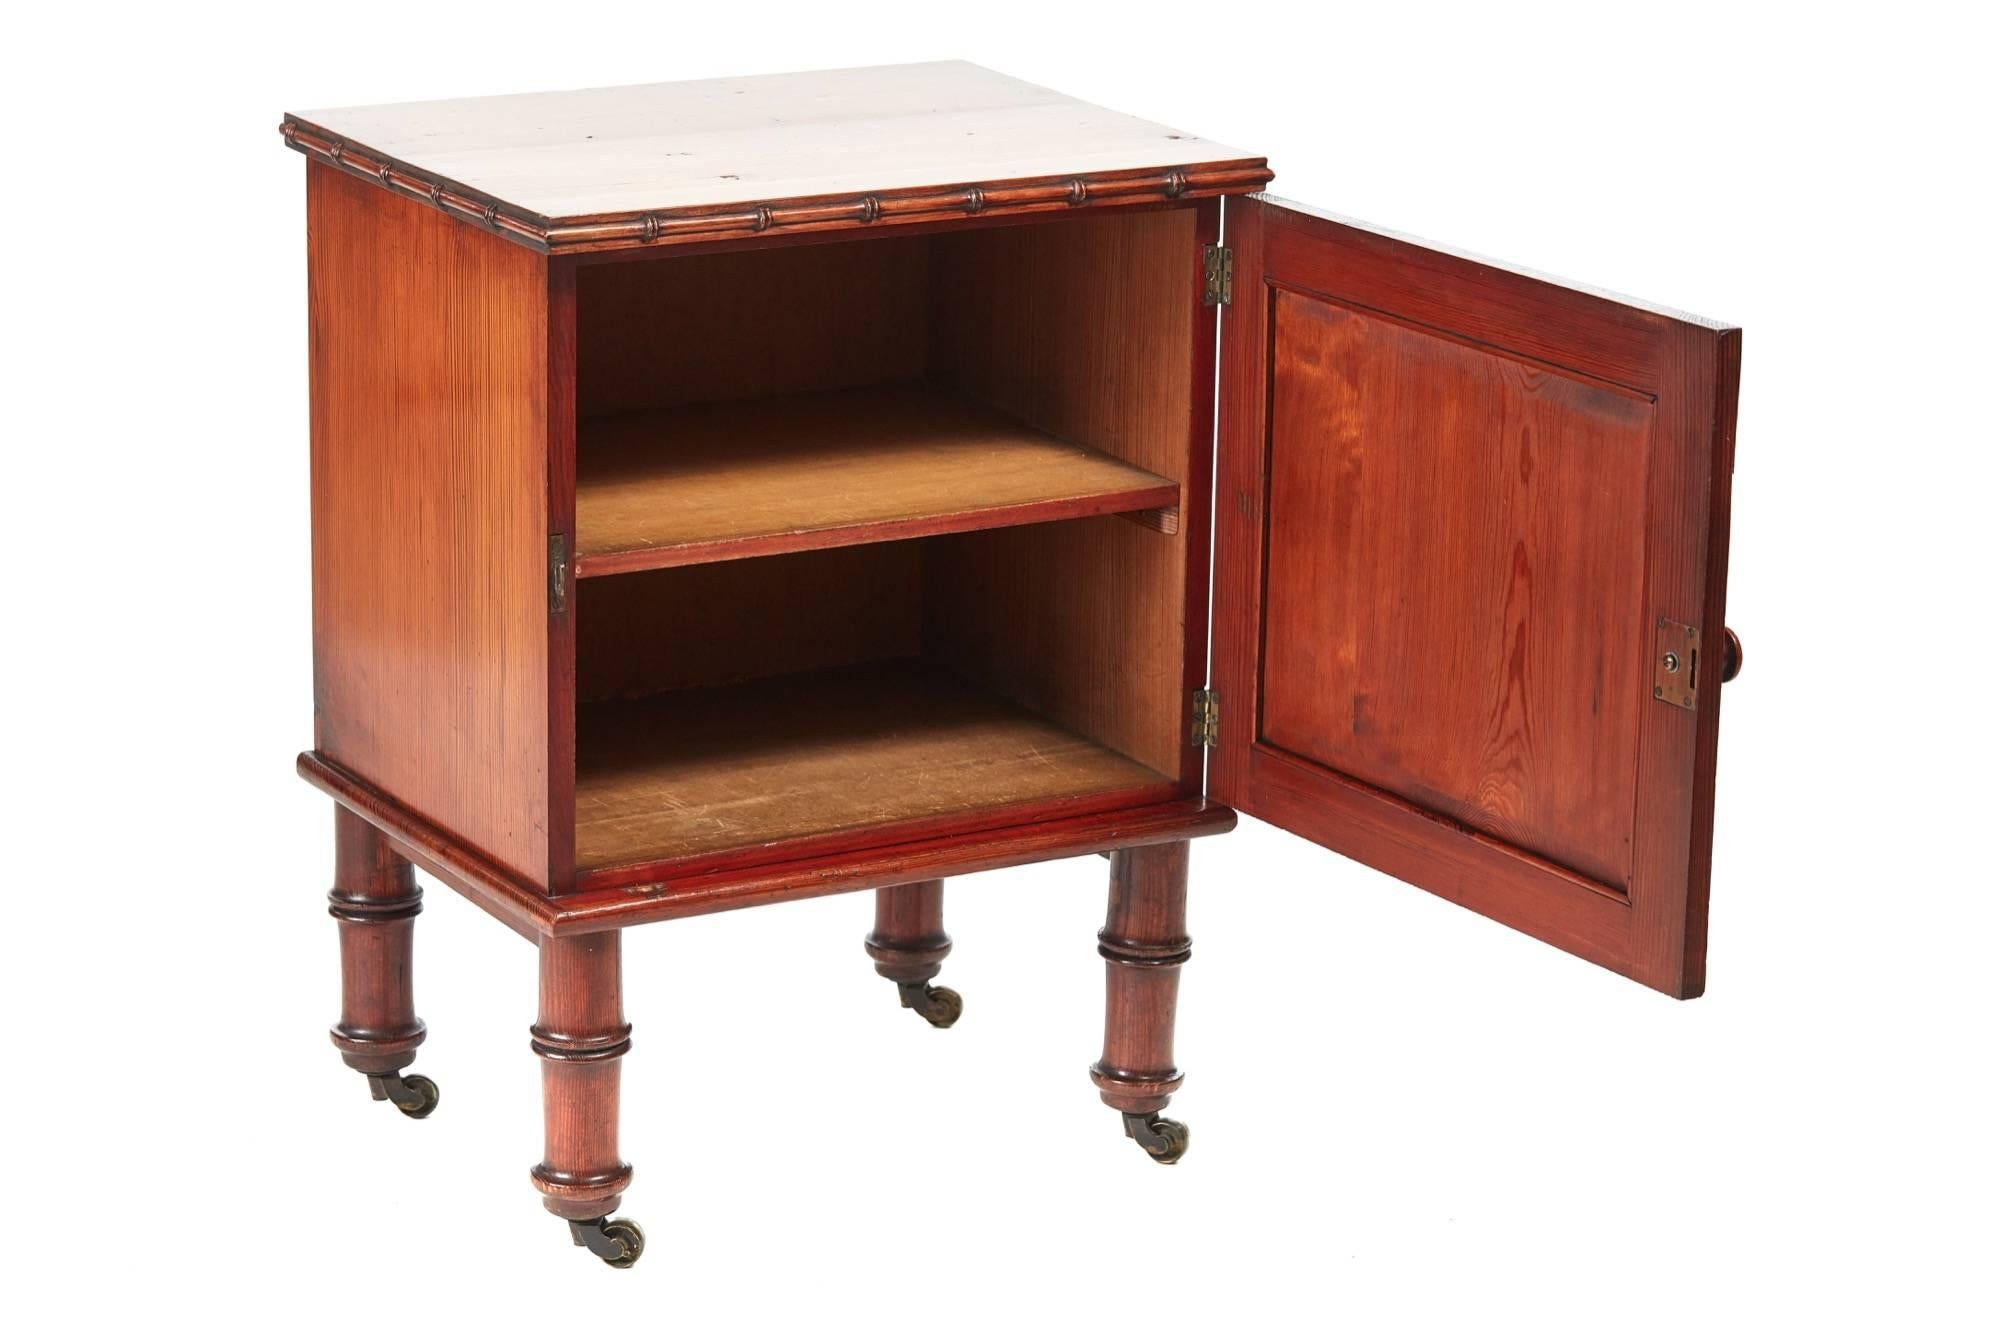 Unusual pitch pine bedside cabinet, with a lovely top, single door opening to reveal one shelf interior, standing on four ring turned legs with original castors
Lovely color and condition
Measures: 21